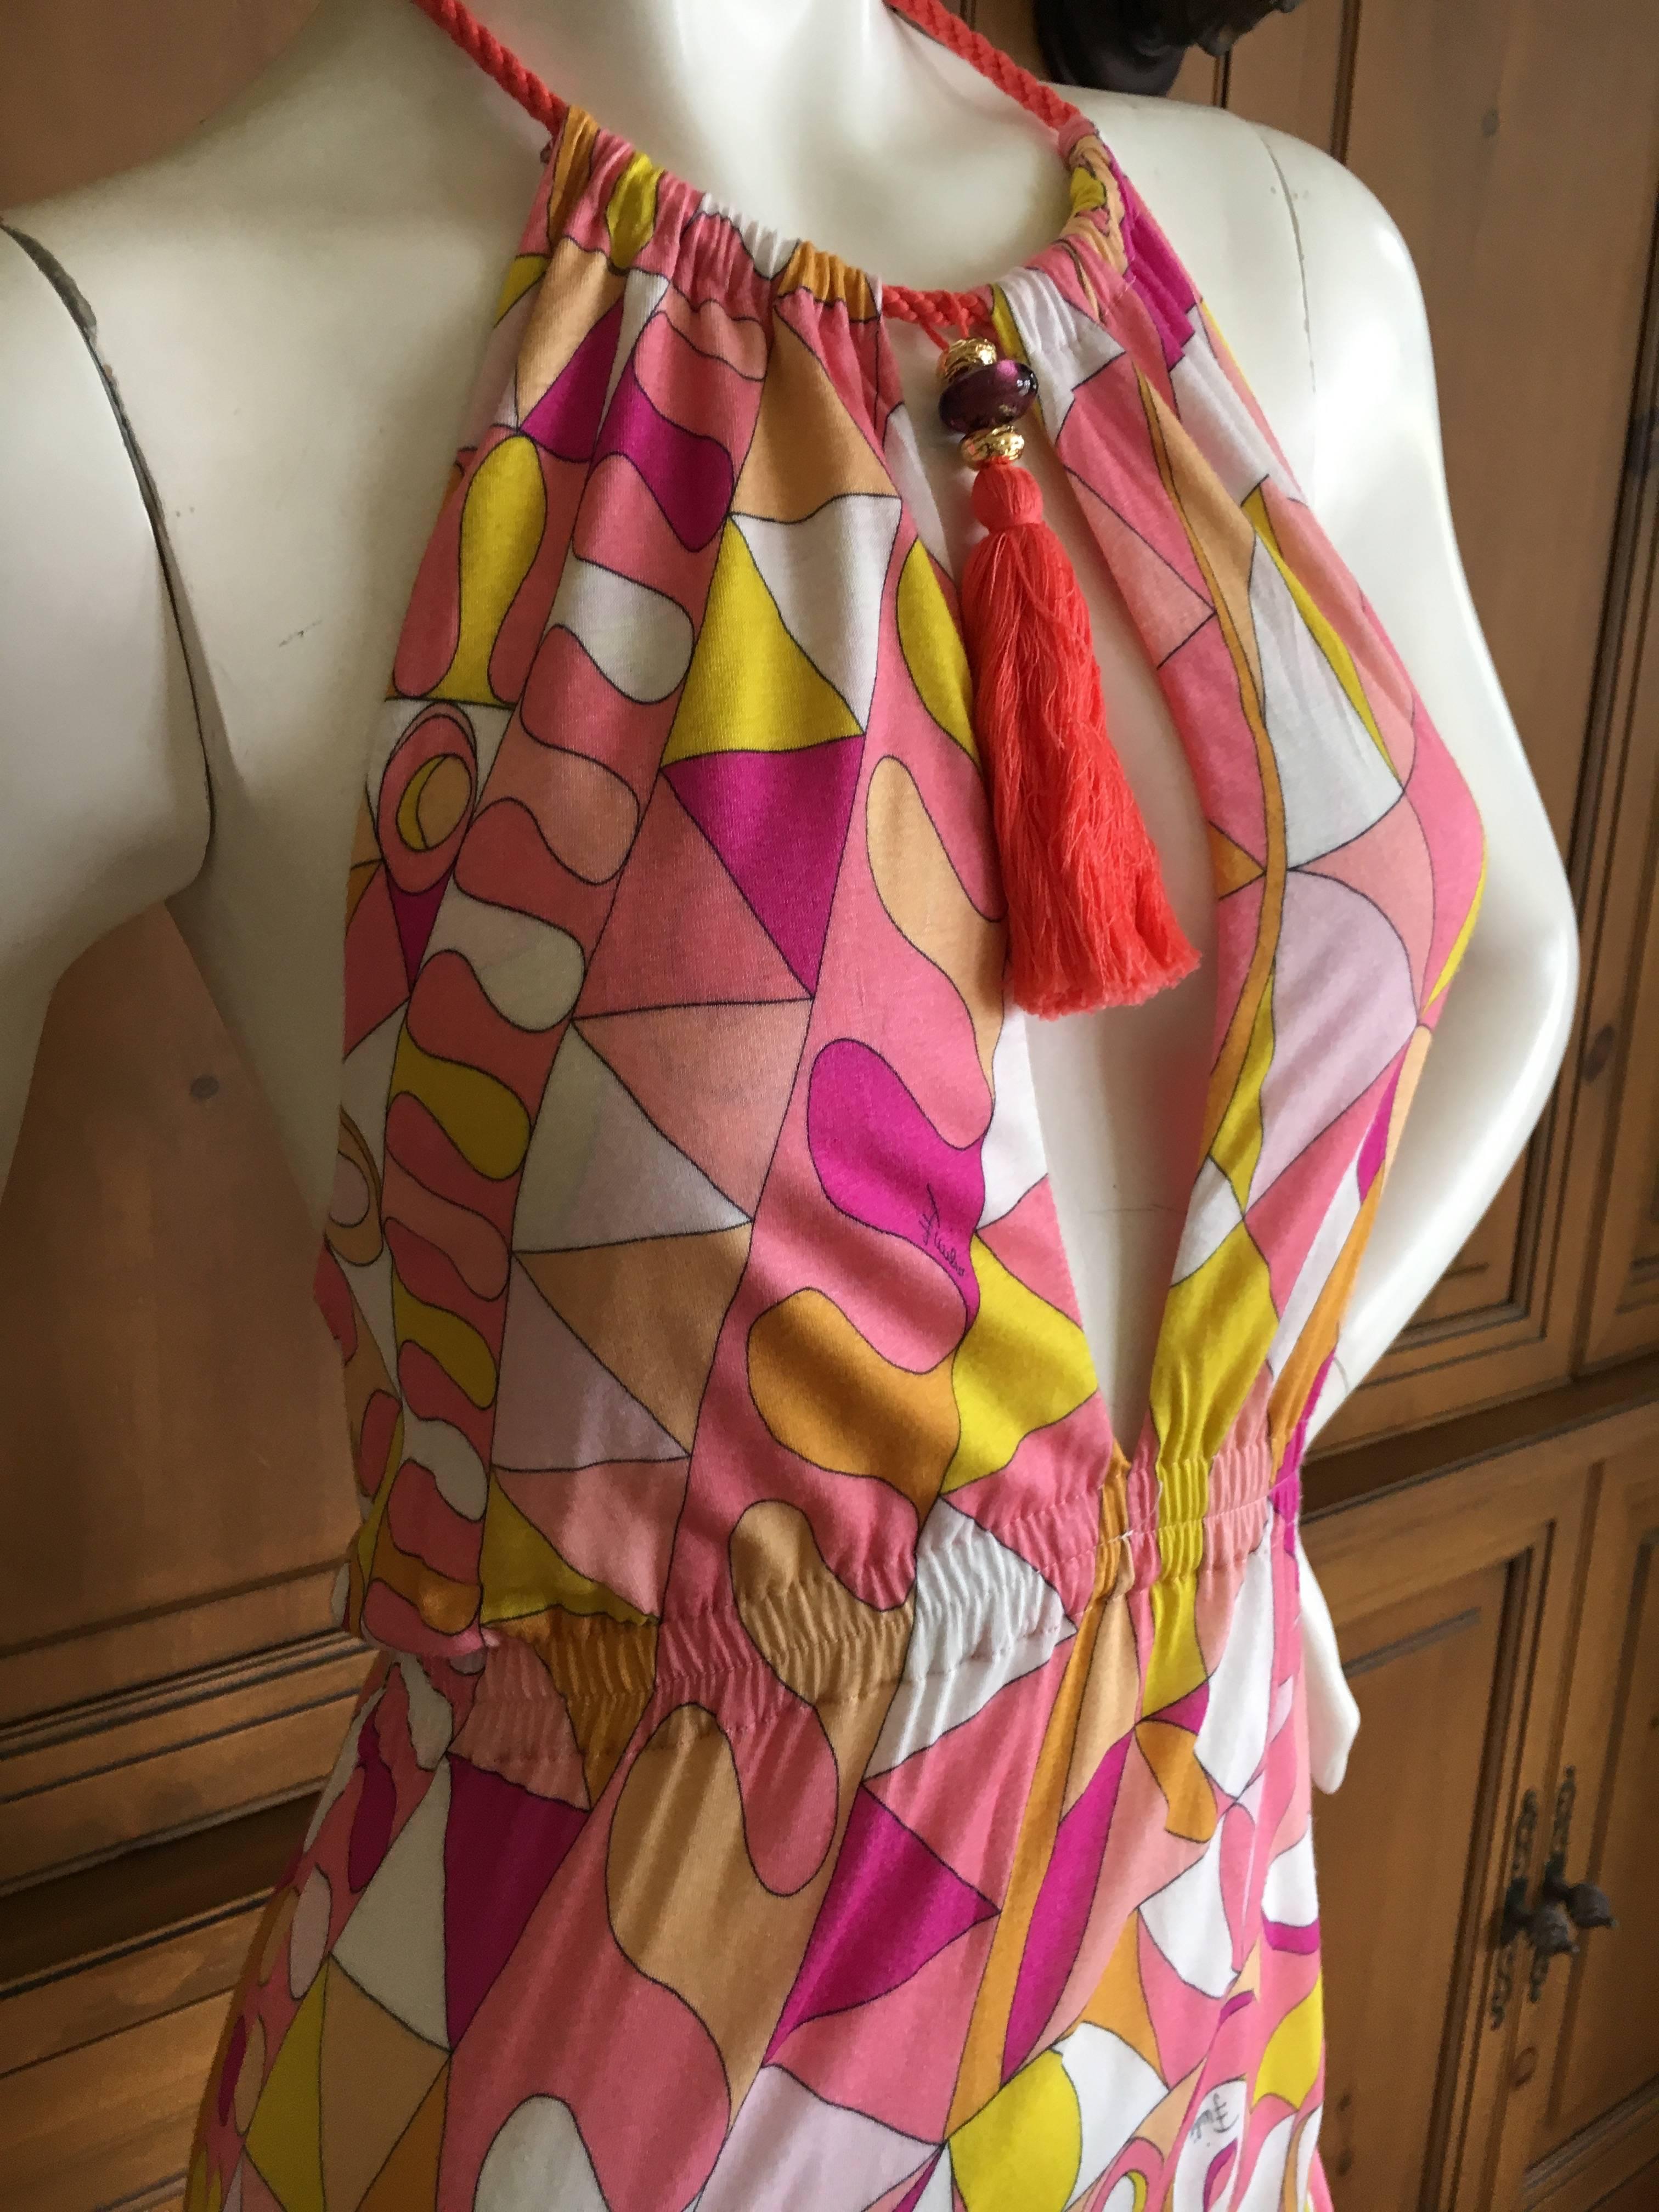 Pink Emilio Pucci Halter Dress with Tassel Necklace Beach Cover